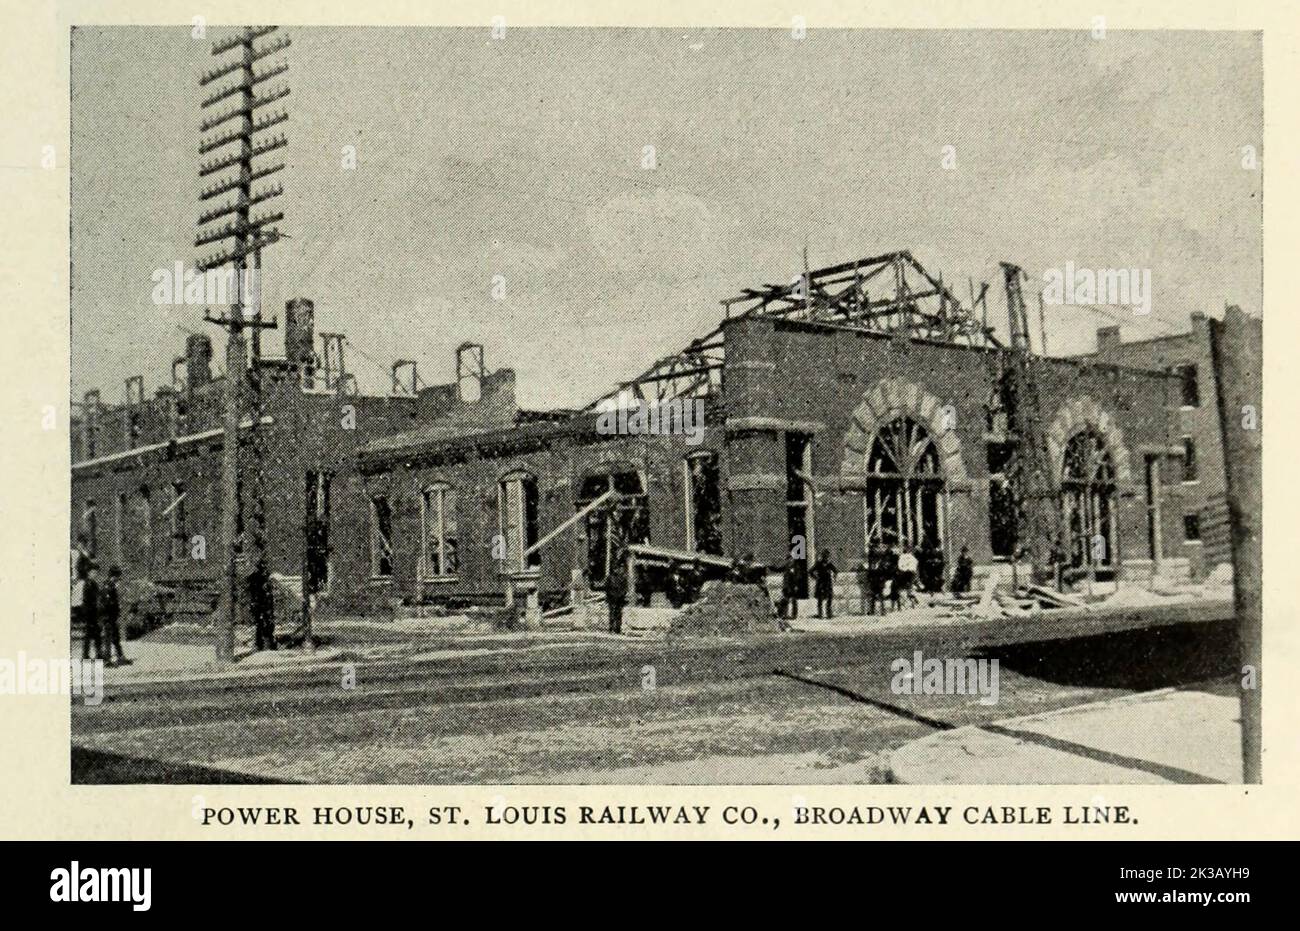 Power House St. Louis Railway Co. Broadway Cable Line from the Article THE STREET RAILWAYS OF ST. LOUIS, Missouri By William H. Bryan, M. E. from The Engineering Magazine DEVOTED TO INDUSTRIAL PROGRESS Volume VIII April to September, 1895 NEW YORK The Engineering Magazine Co Stock Photo